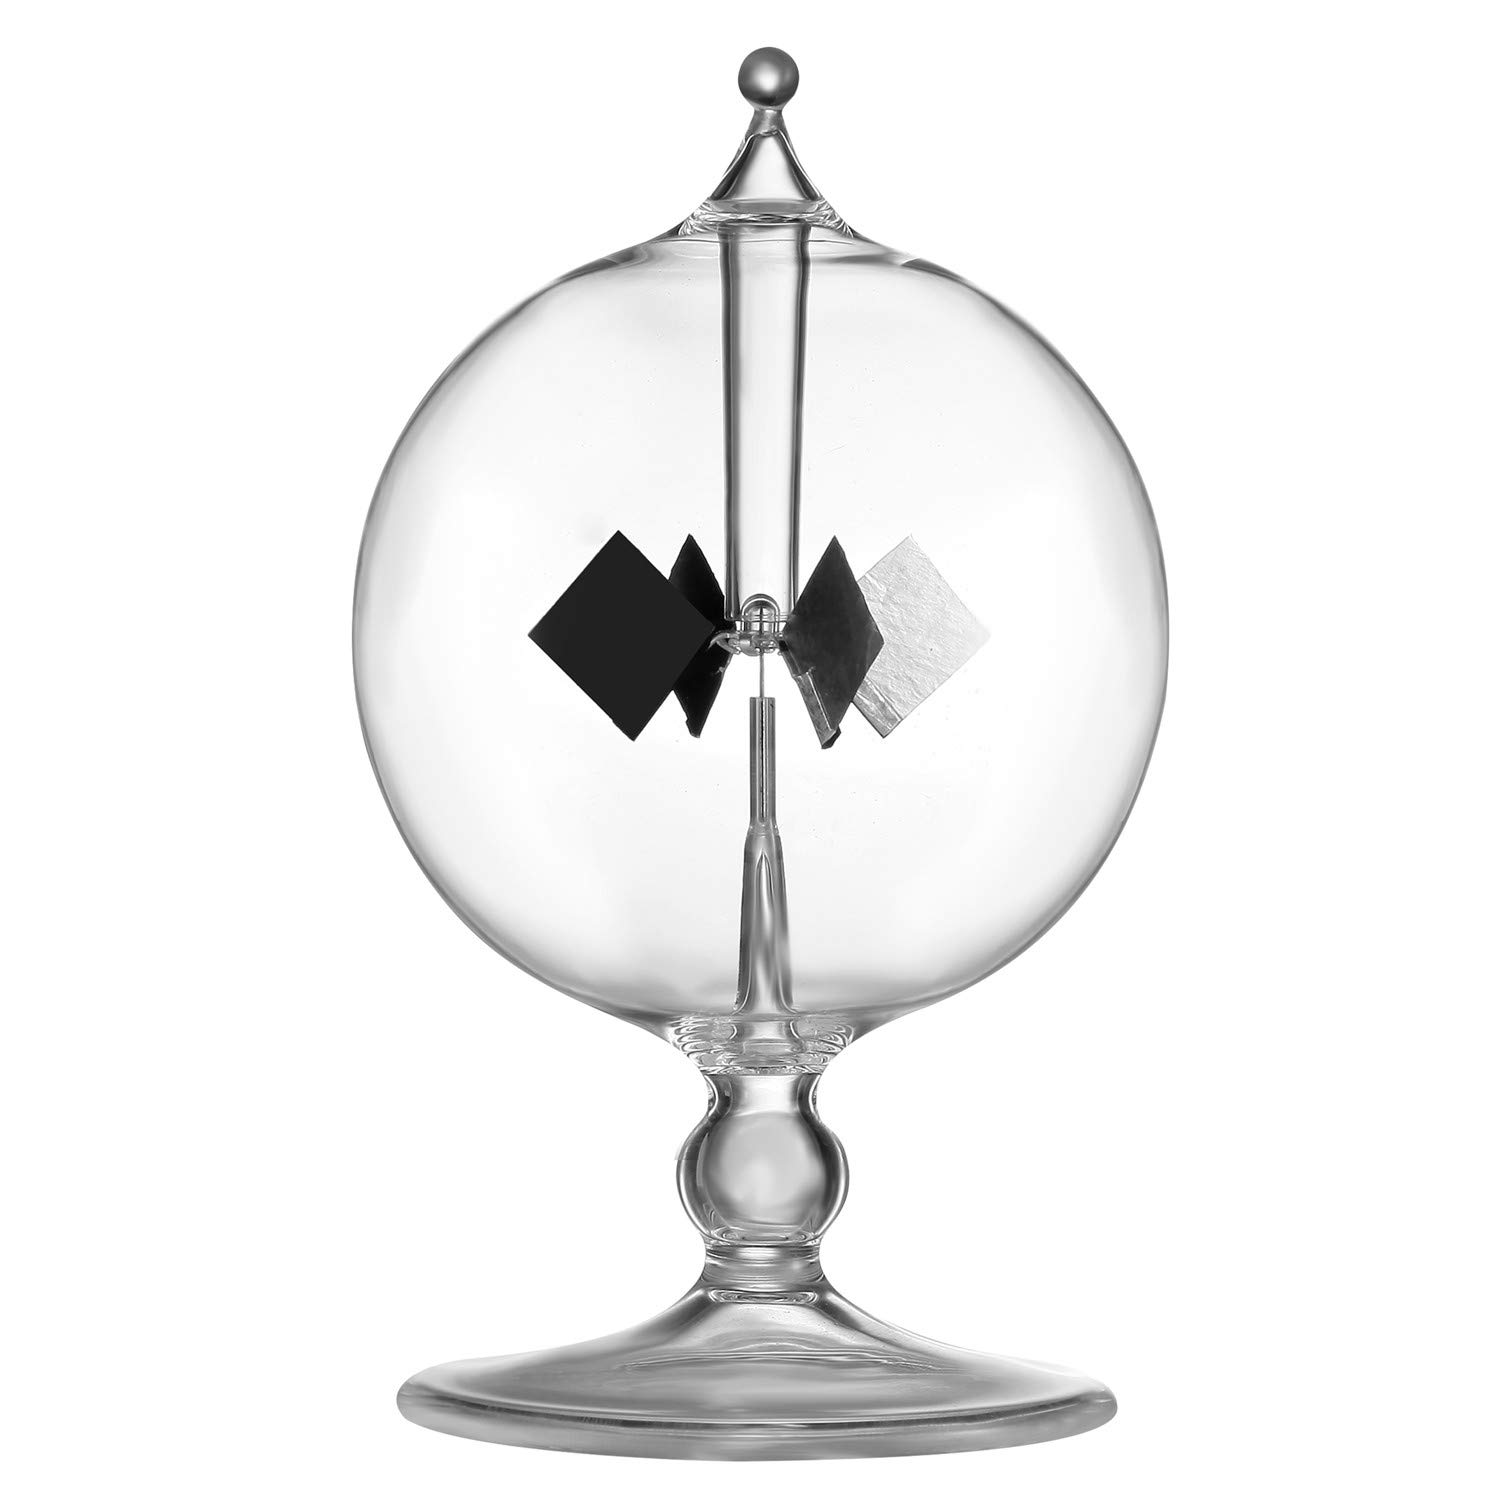 Gadget that looks like glass lamp with squares inside it. The device is called radiometer. When you put the radiometer in the sun, the vanes will keep spinning.